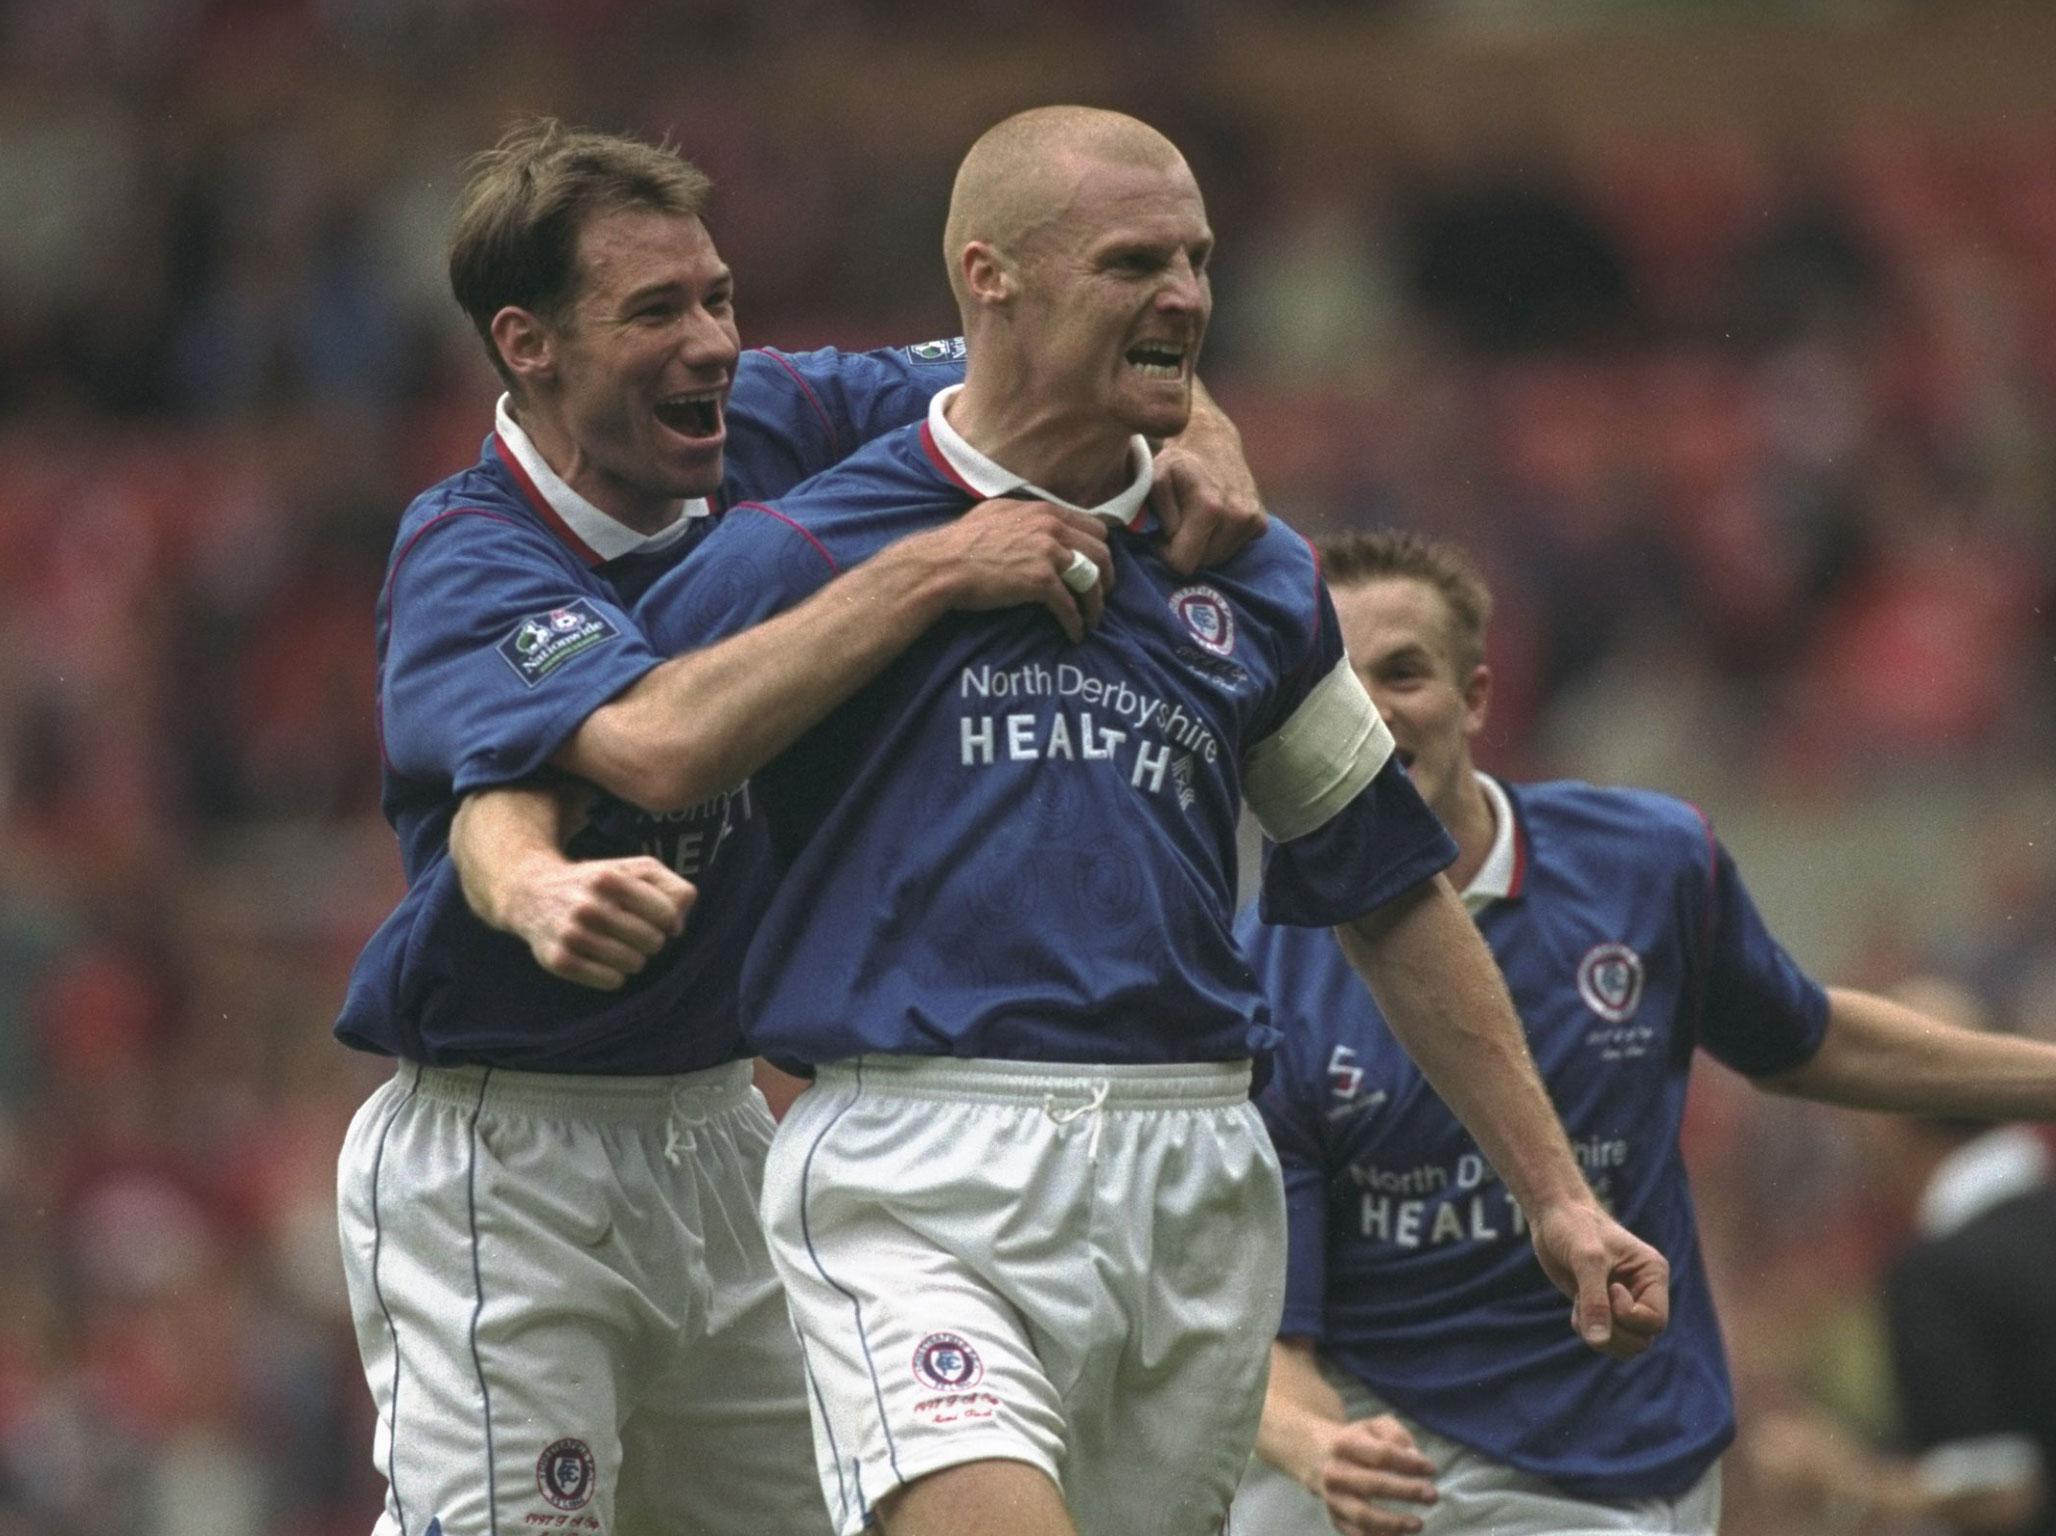 From Chesterfield to chasing Champions League: The making of Sean Dyche